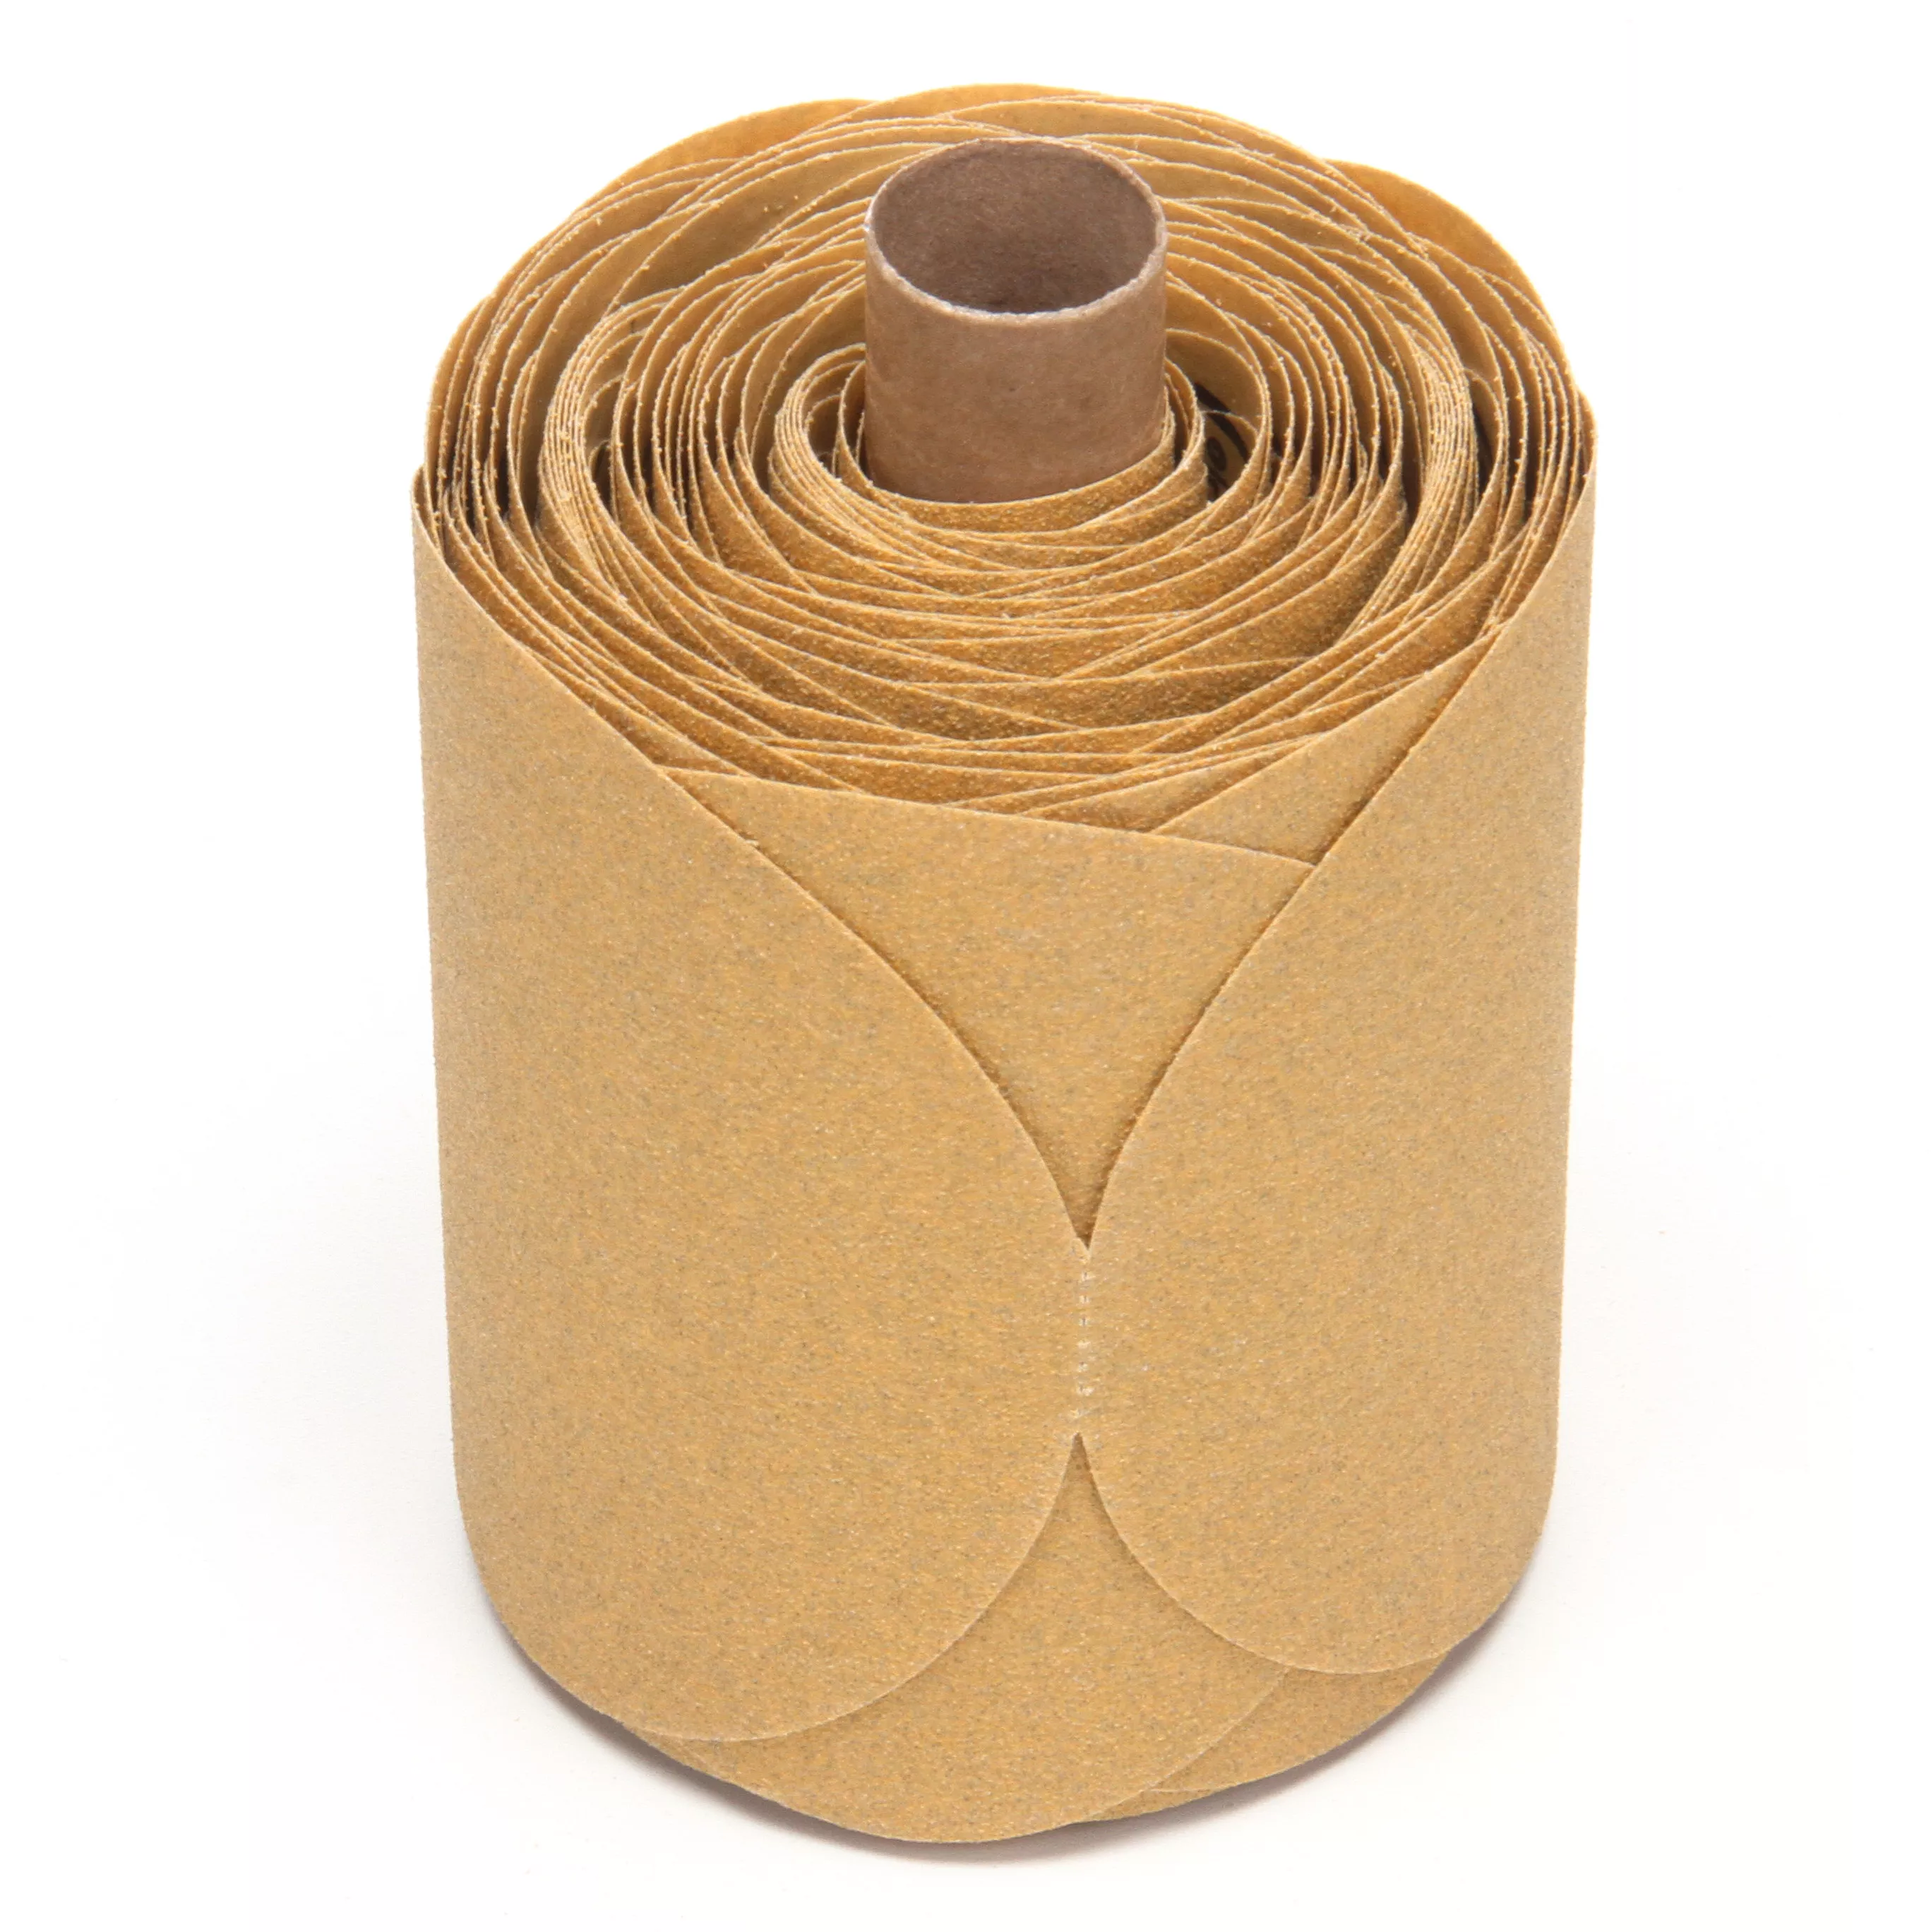 Product Number 216U | 3M™ Stikit™ Gold Disc Roll